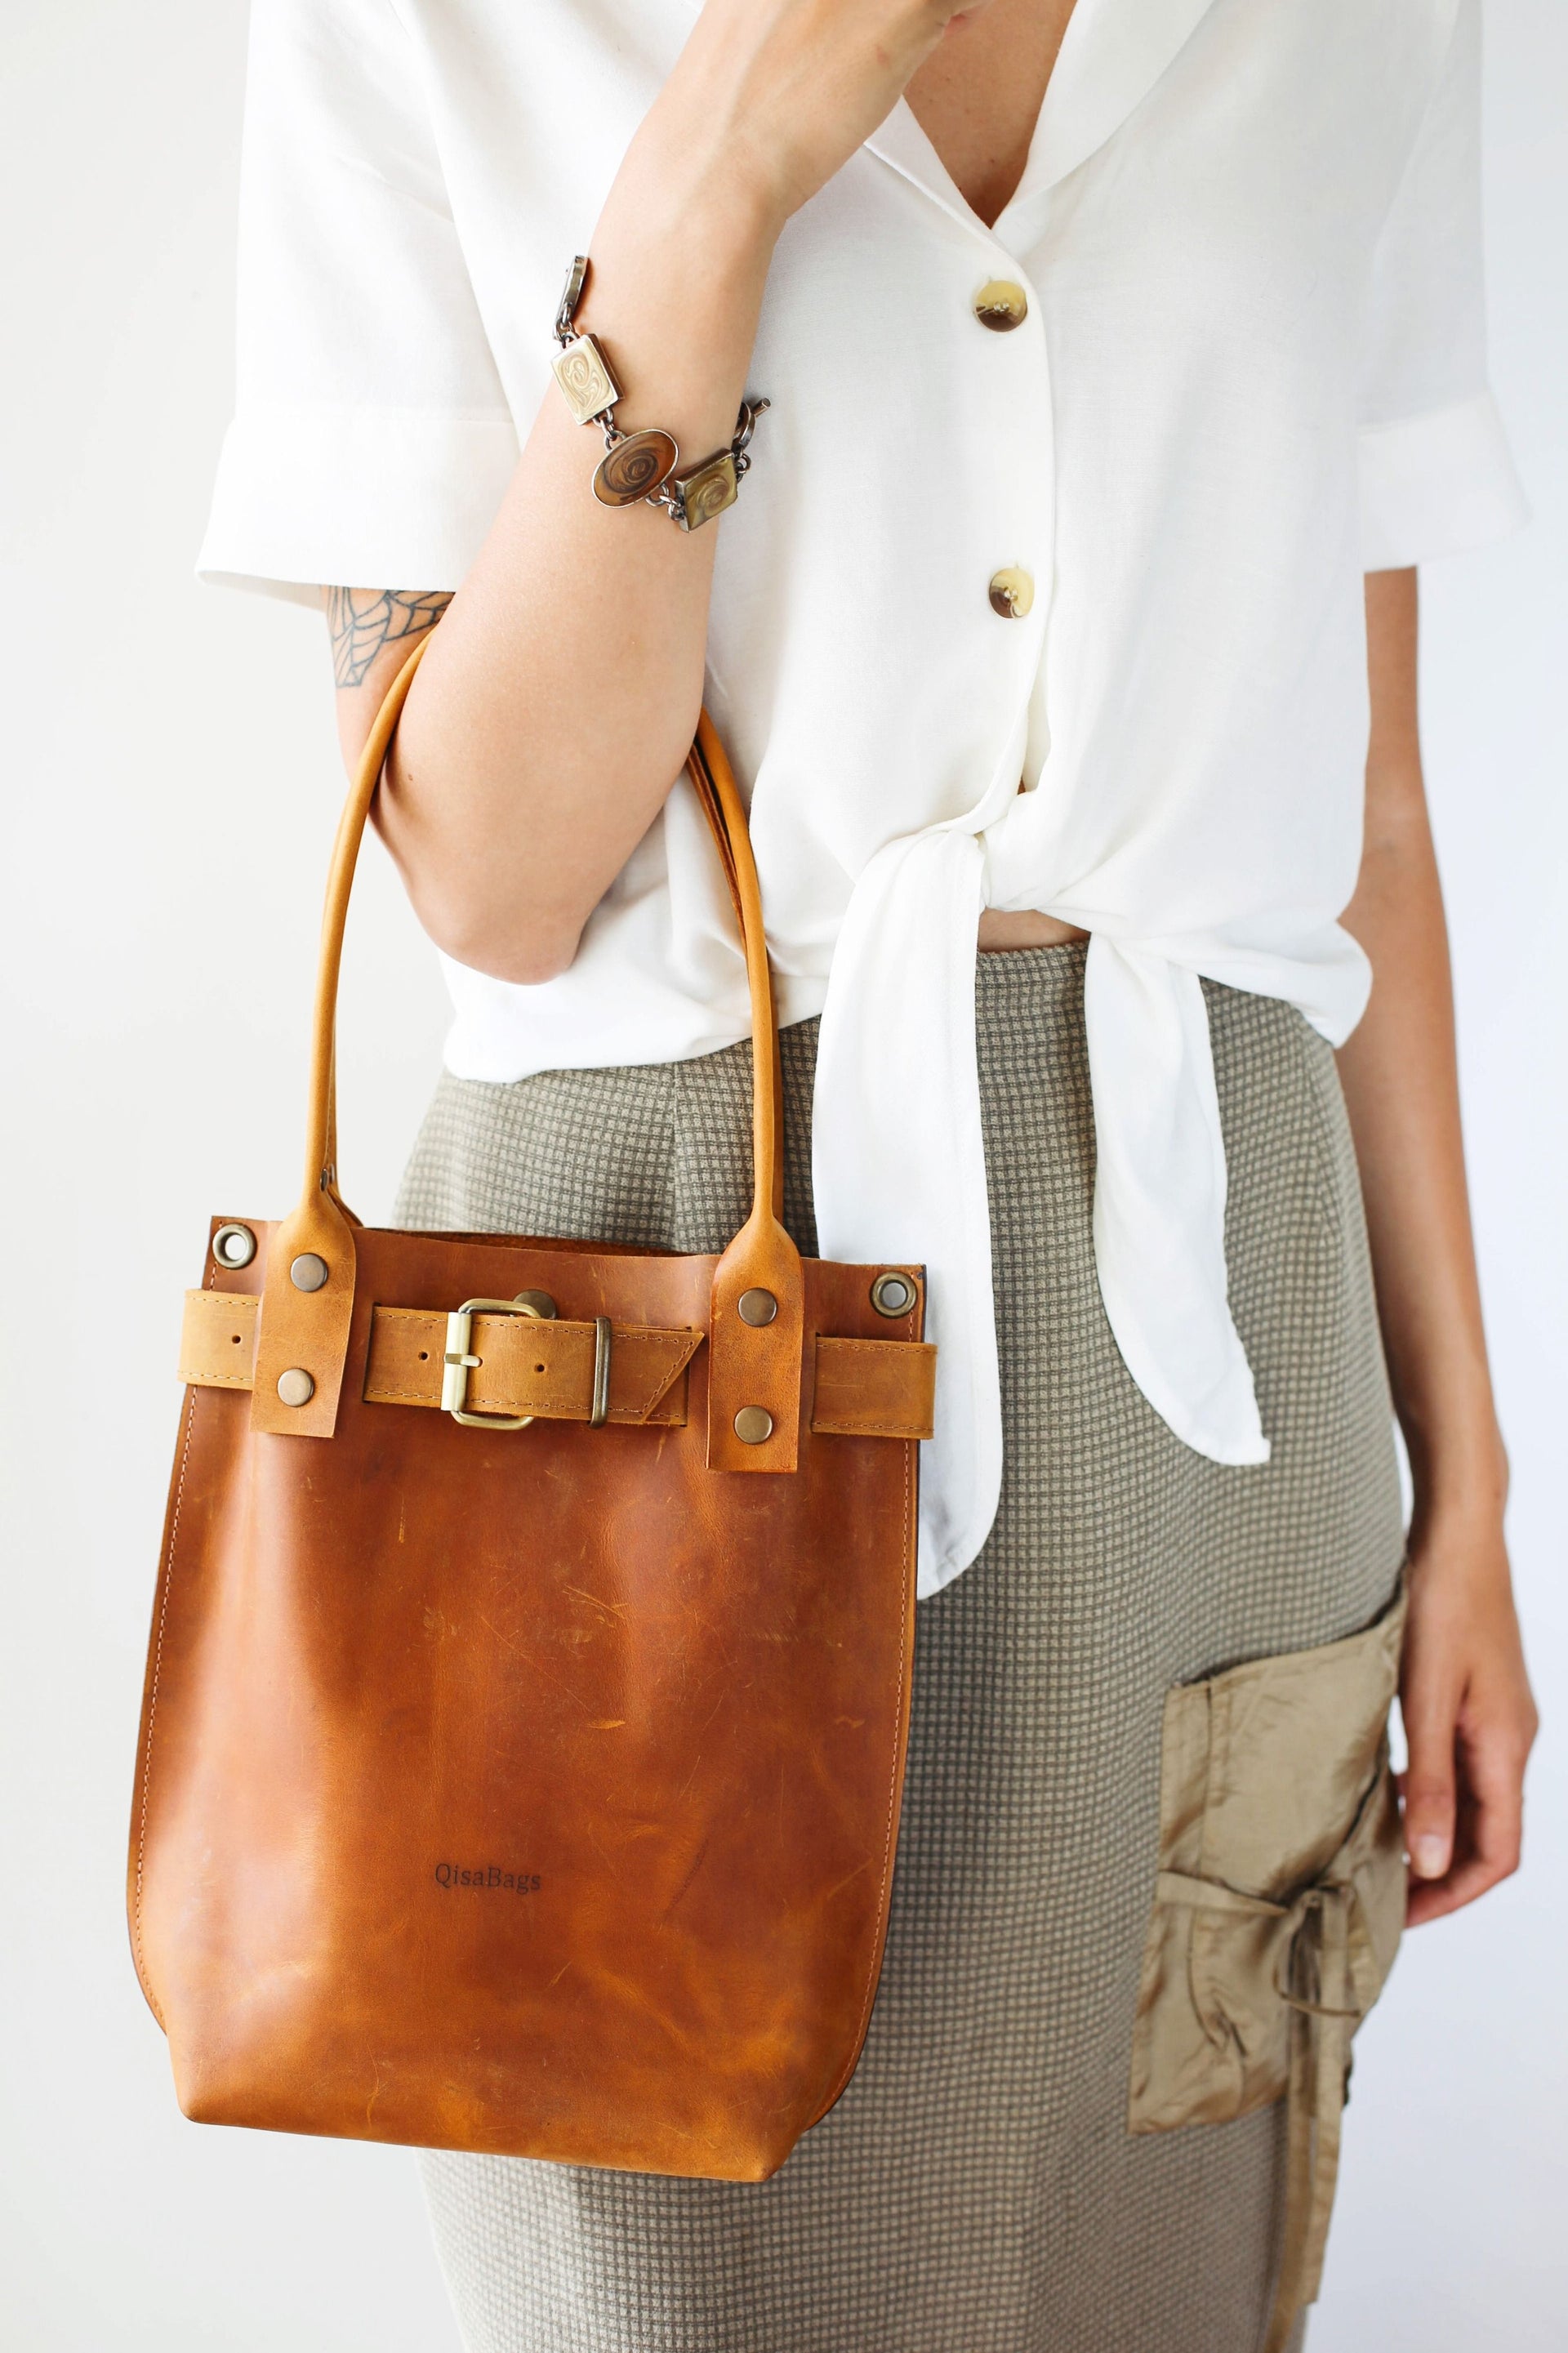 leather bags for women